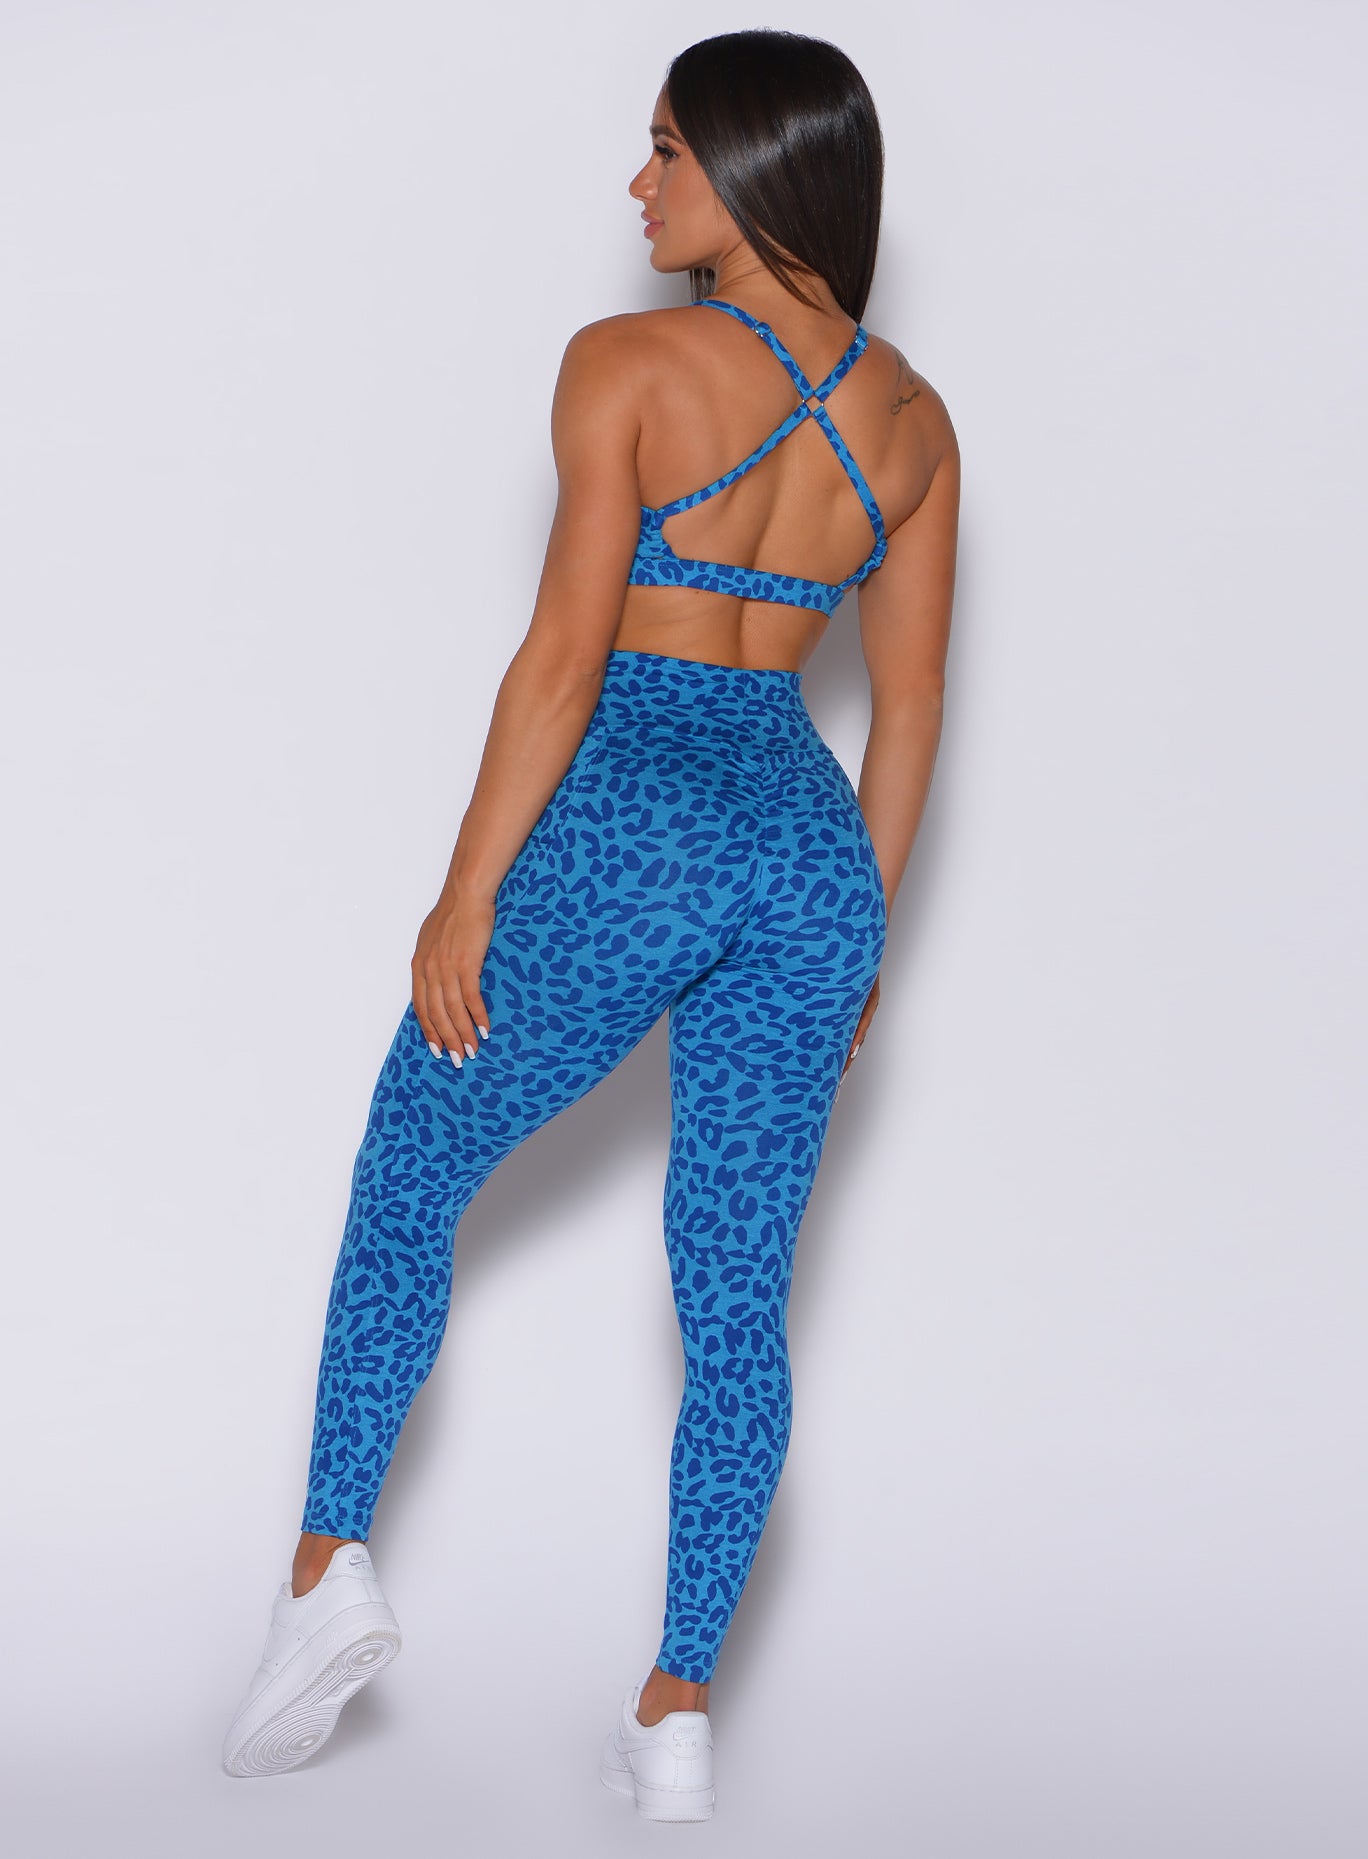 Back profile view of a model facing to her left wearing our curves leggings in blue cheetah color and a matching bra